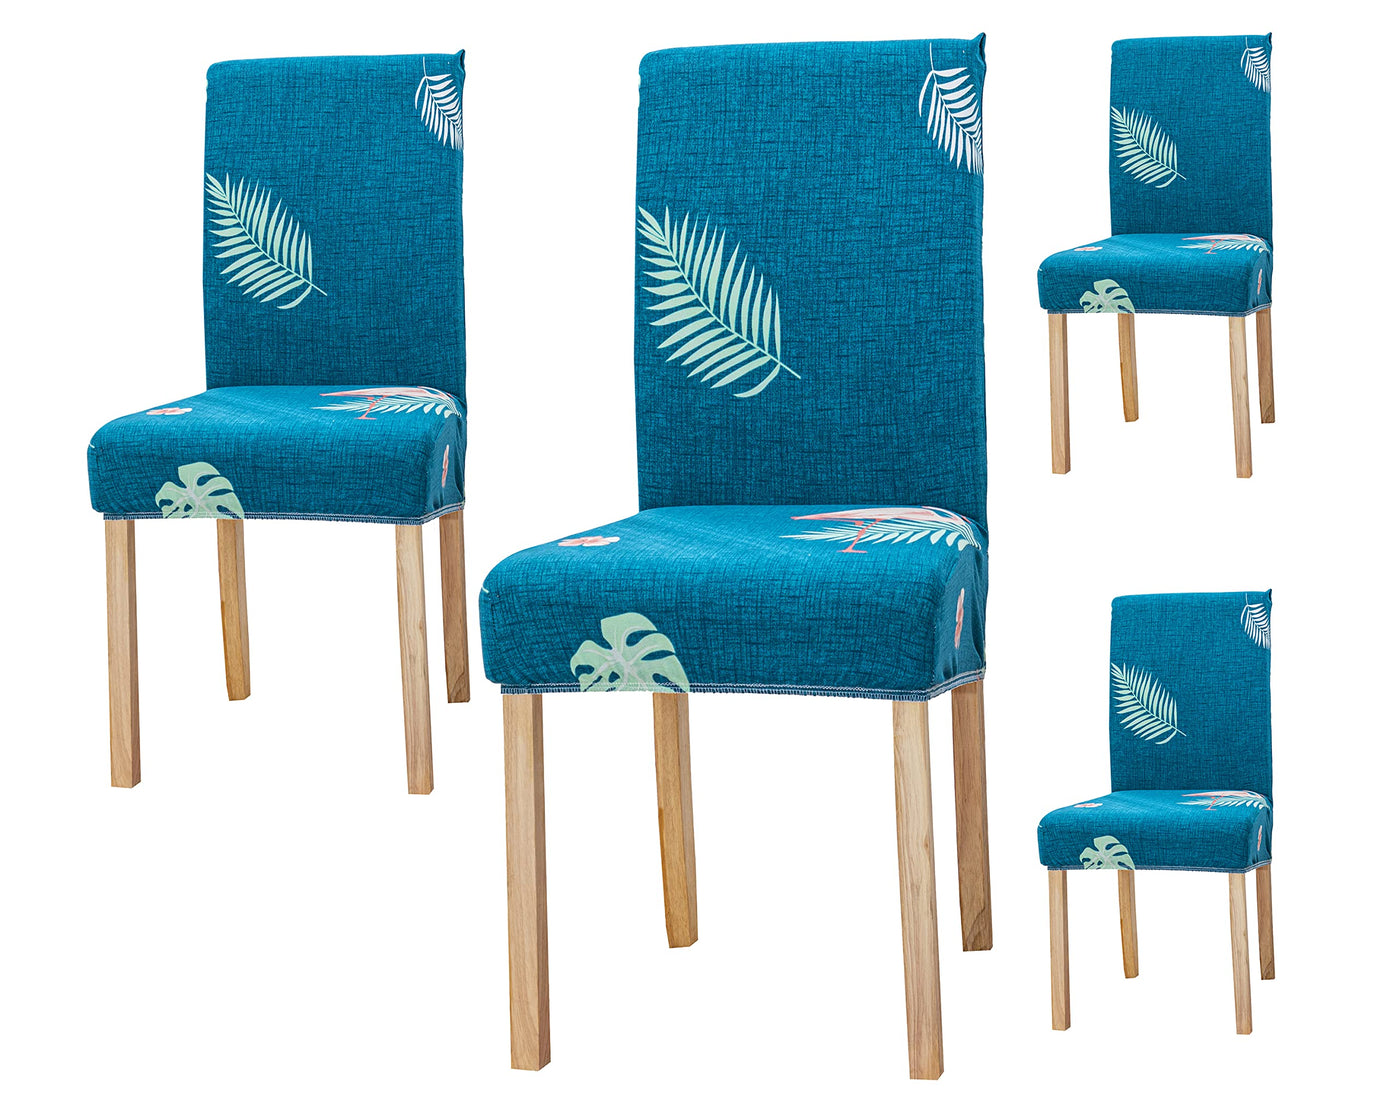 Printed Chair Cover - Teal Flamingo